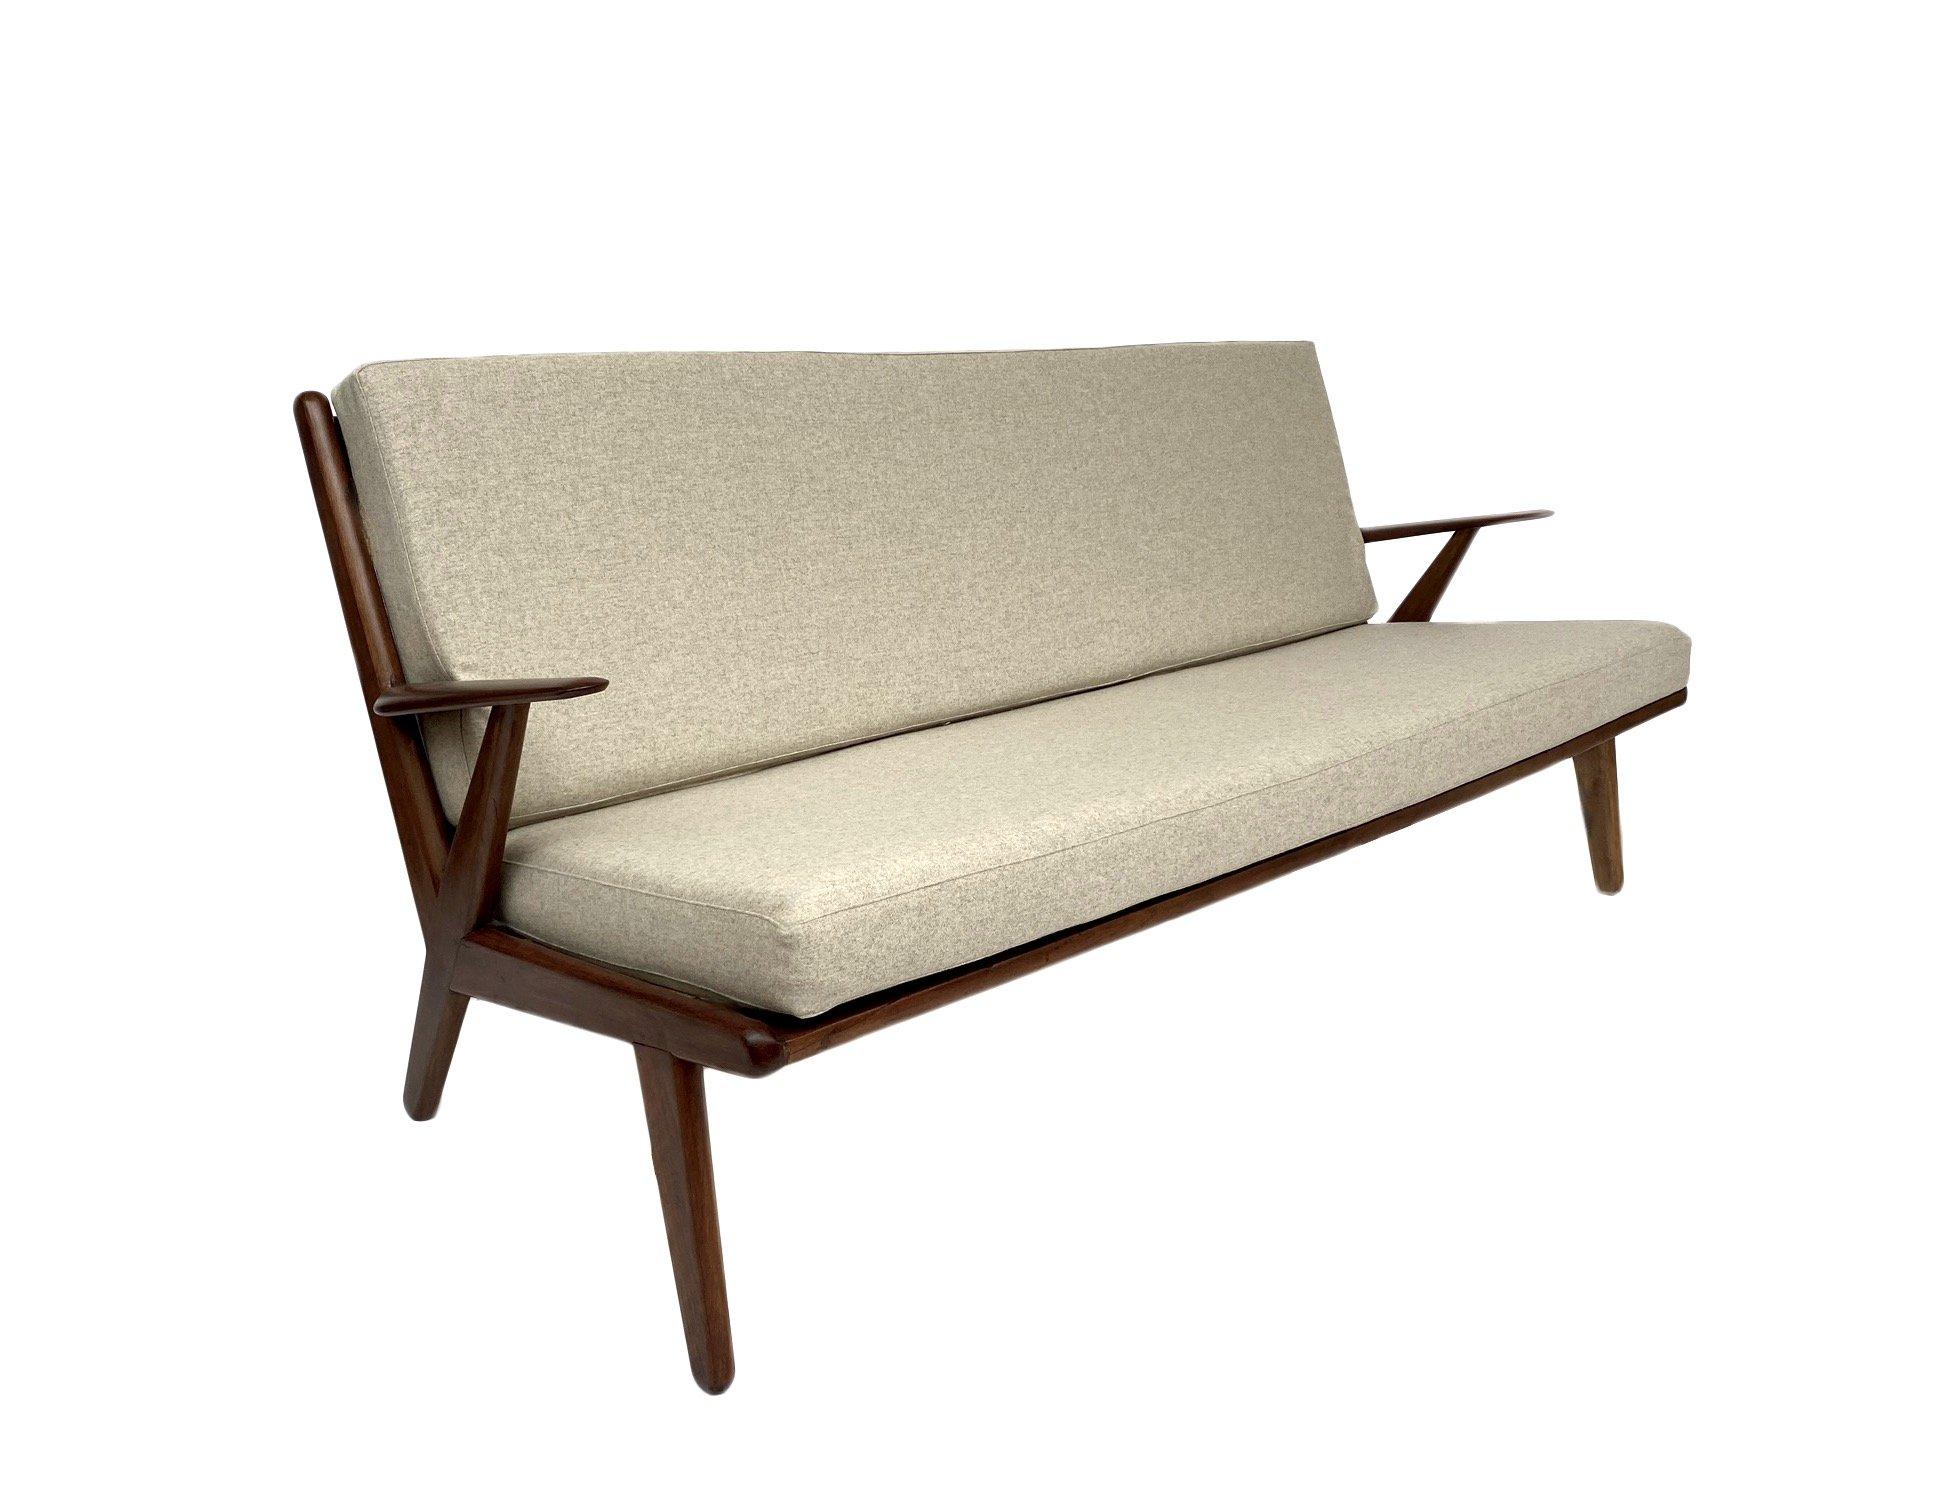 A beautiful Ercol cream wool and teak 3 seater sofa, this would make a stylish addition to any living or work area.

The sofa has a padded backrest and teak armrests for enhanced comfort. A striking piece of classic Scandinavian furniture.

The sofa